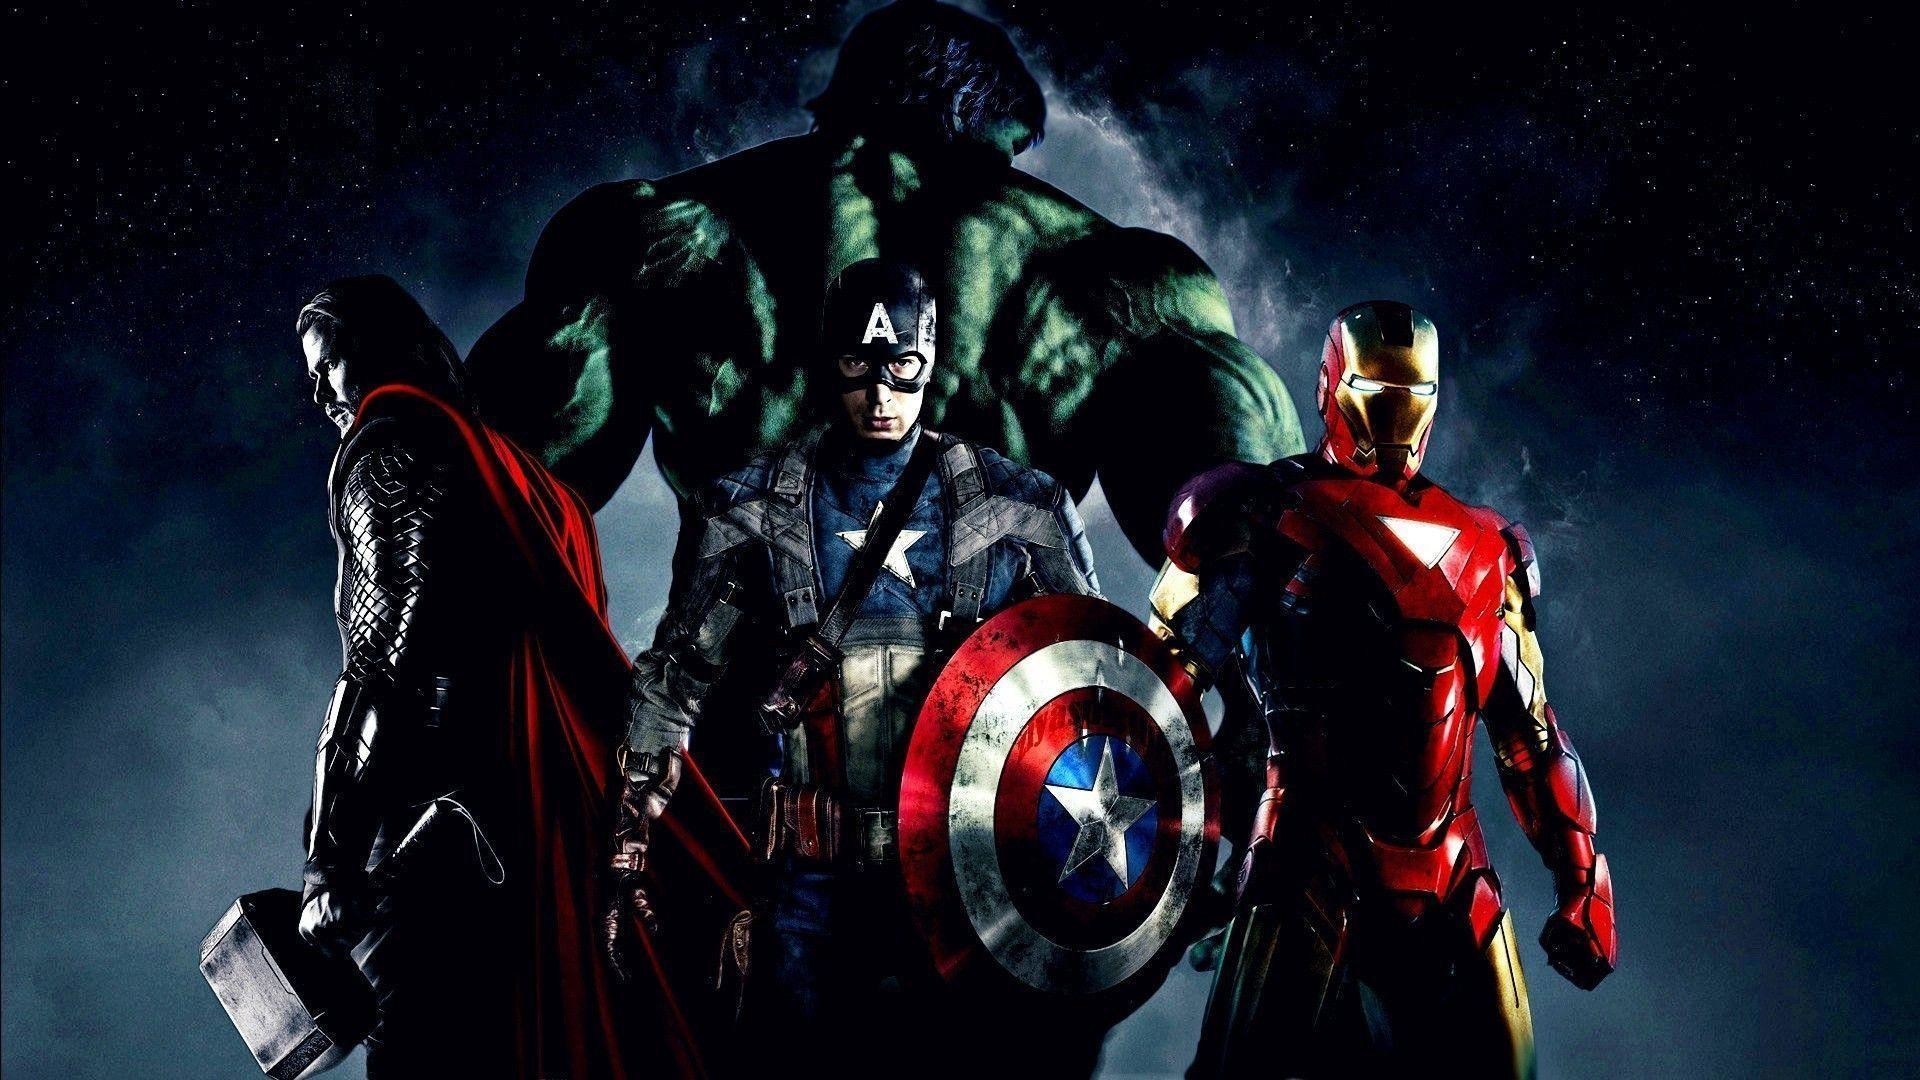 Free Avengers Android Wallpaper Downloads 100 Avengers Android  Wallpapers for FREE  Wallpaperscom